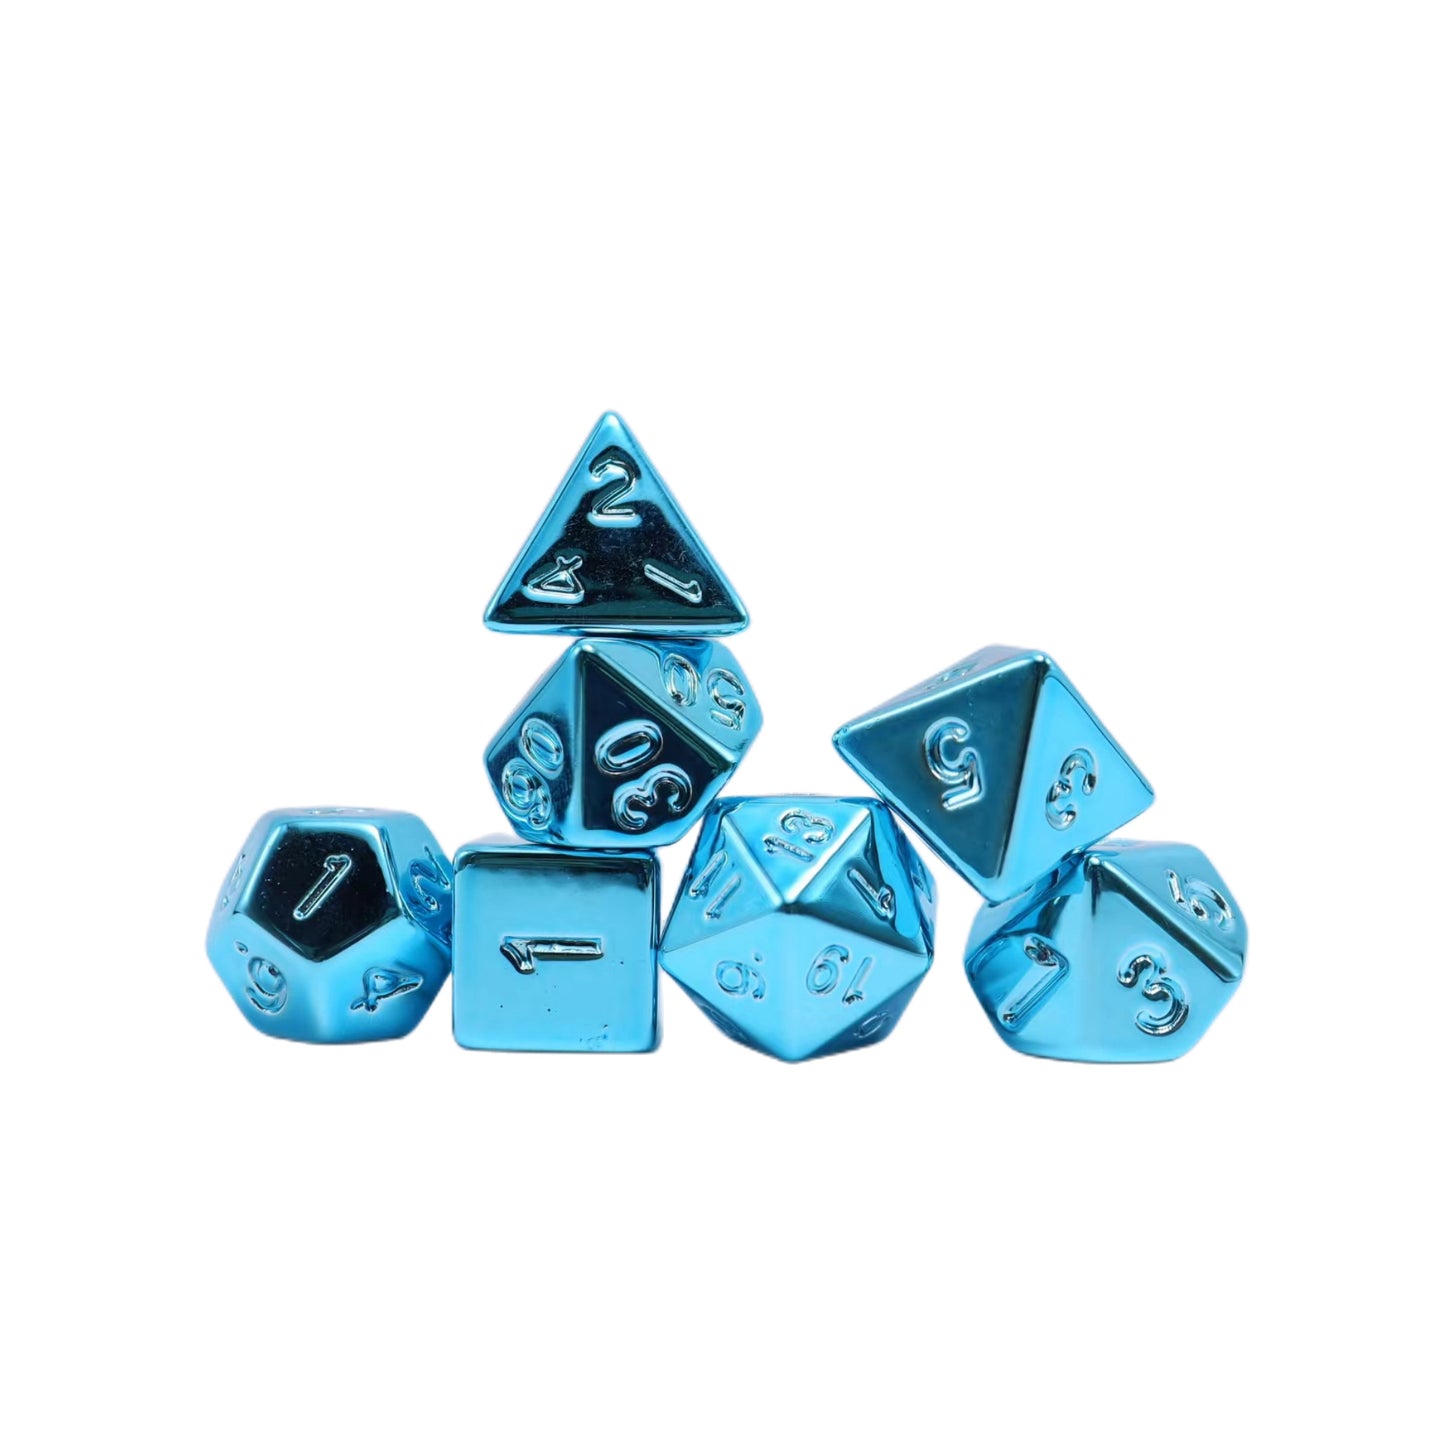 FREE Today: Chrome Effect - Blue Vader (Give away a random dice)